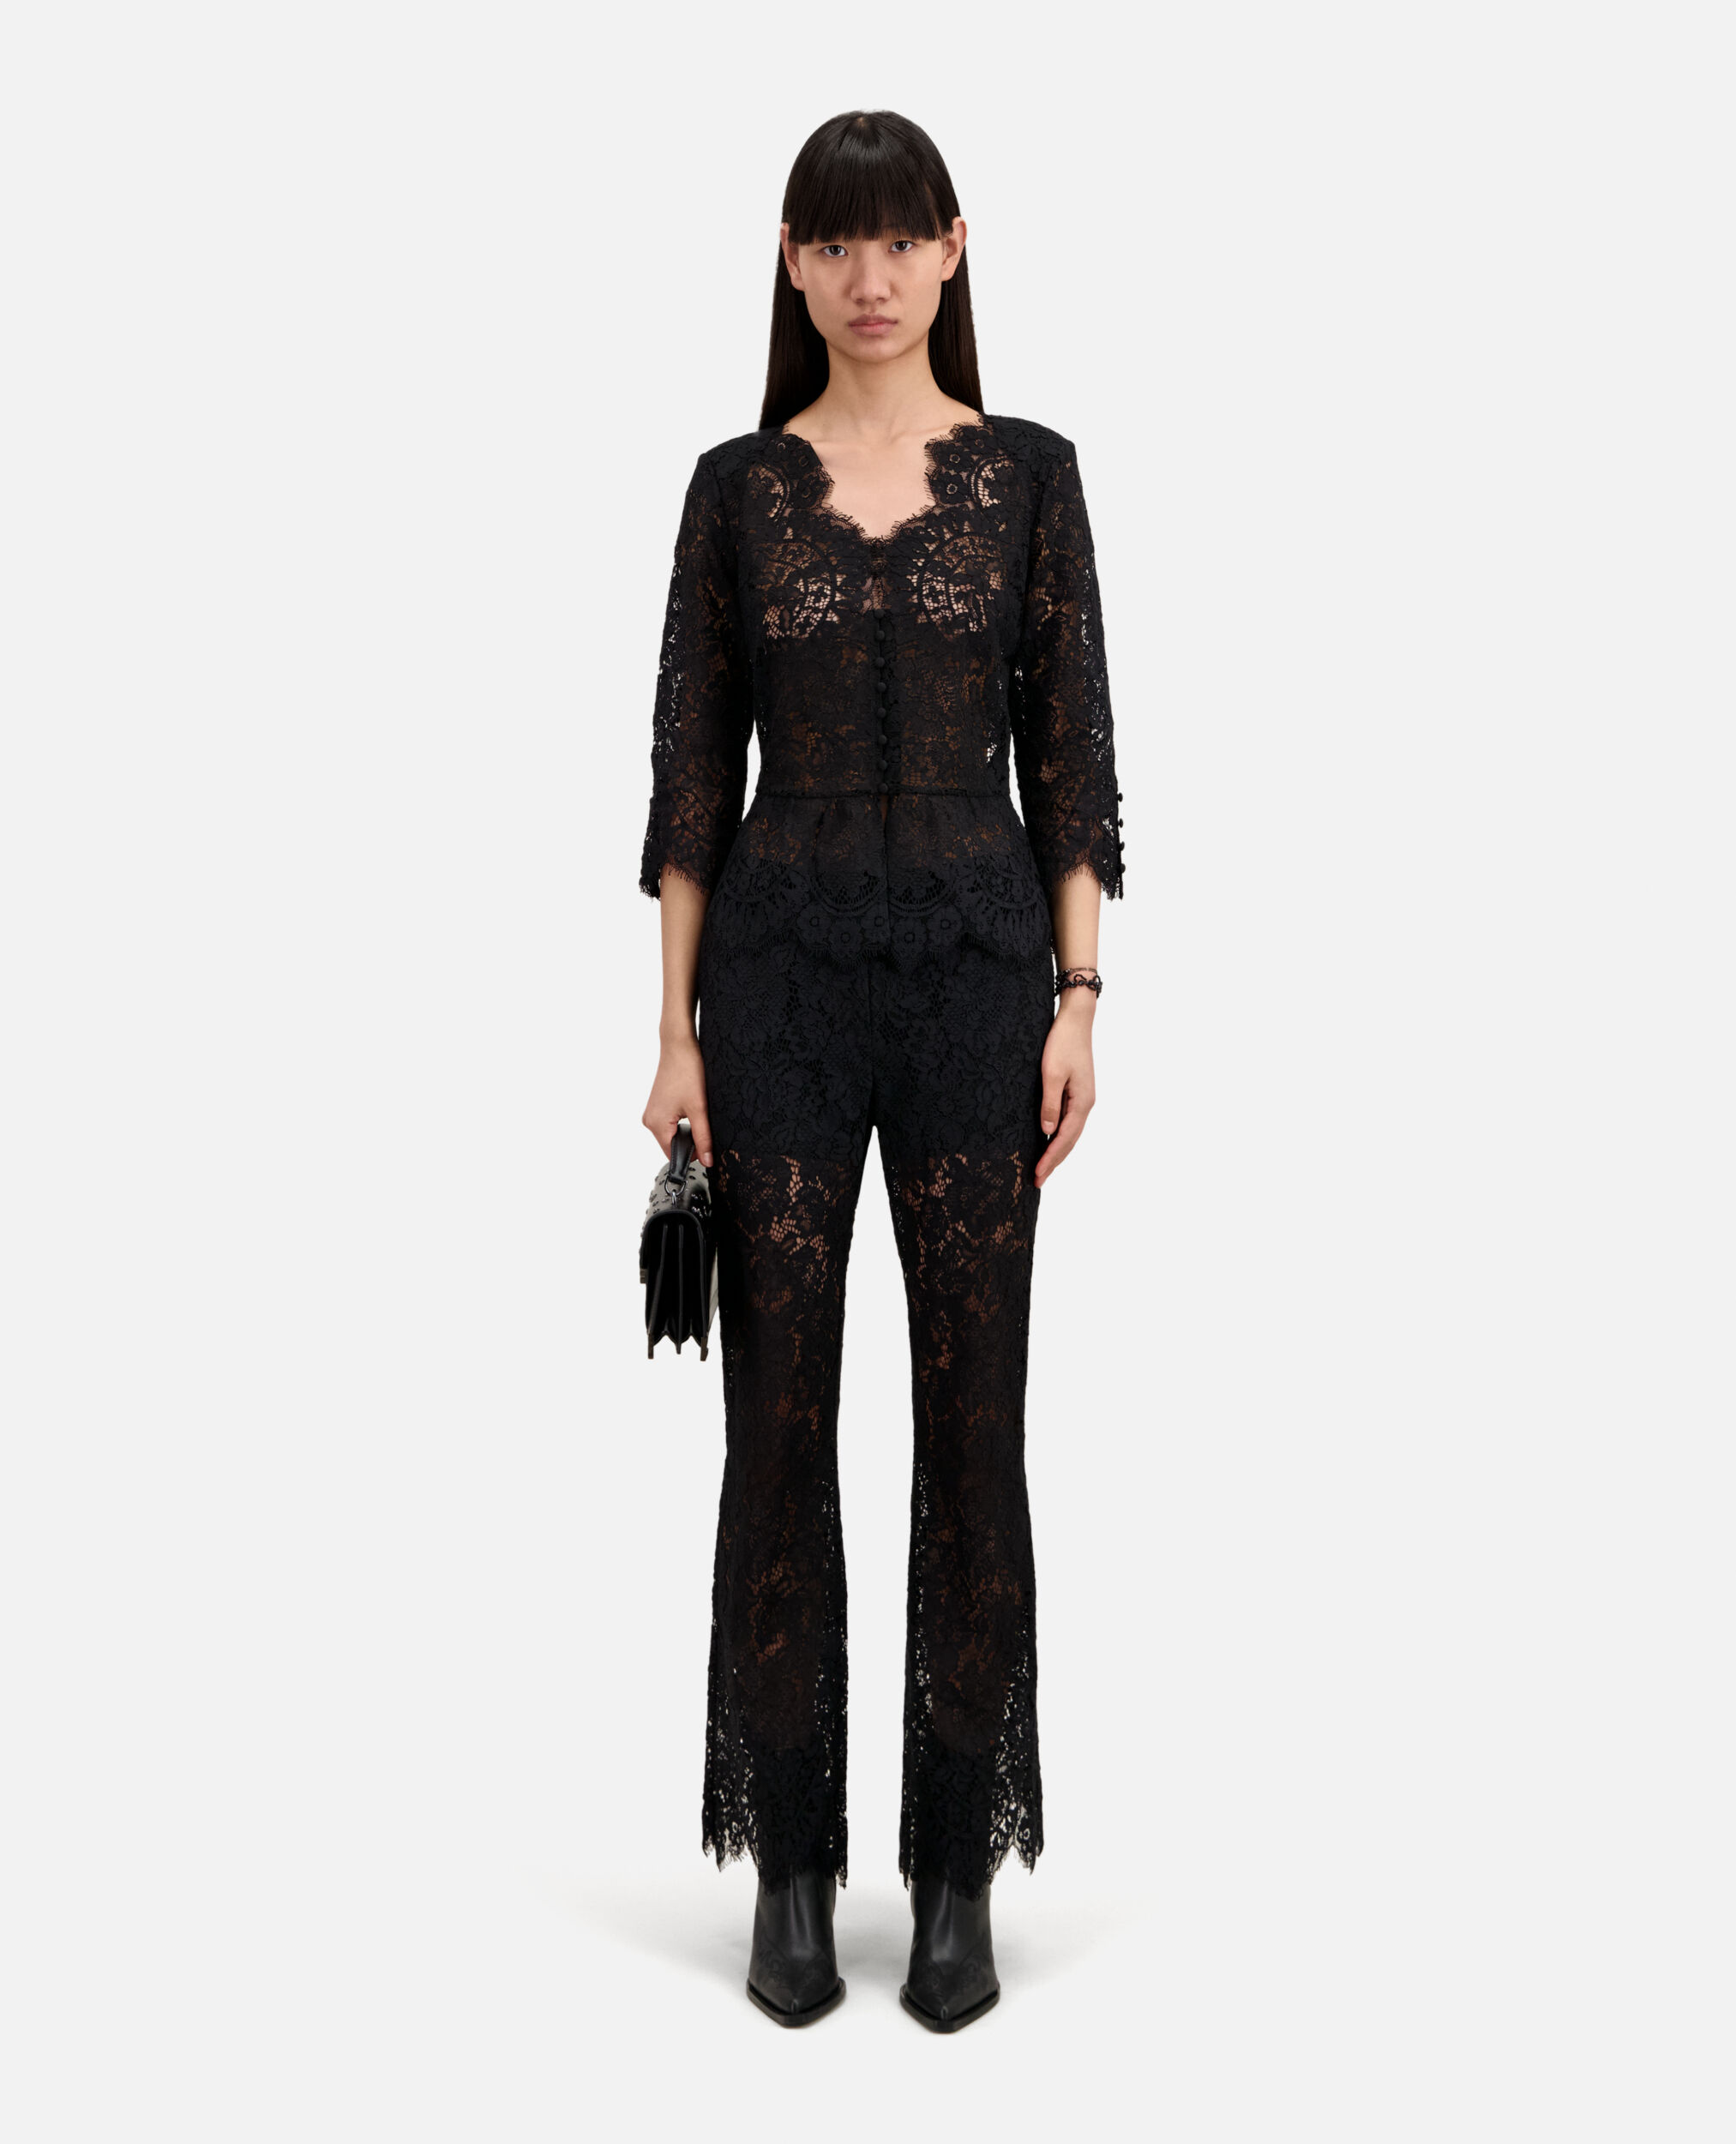 Black lace trousers, BLACK, hi-res image number null